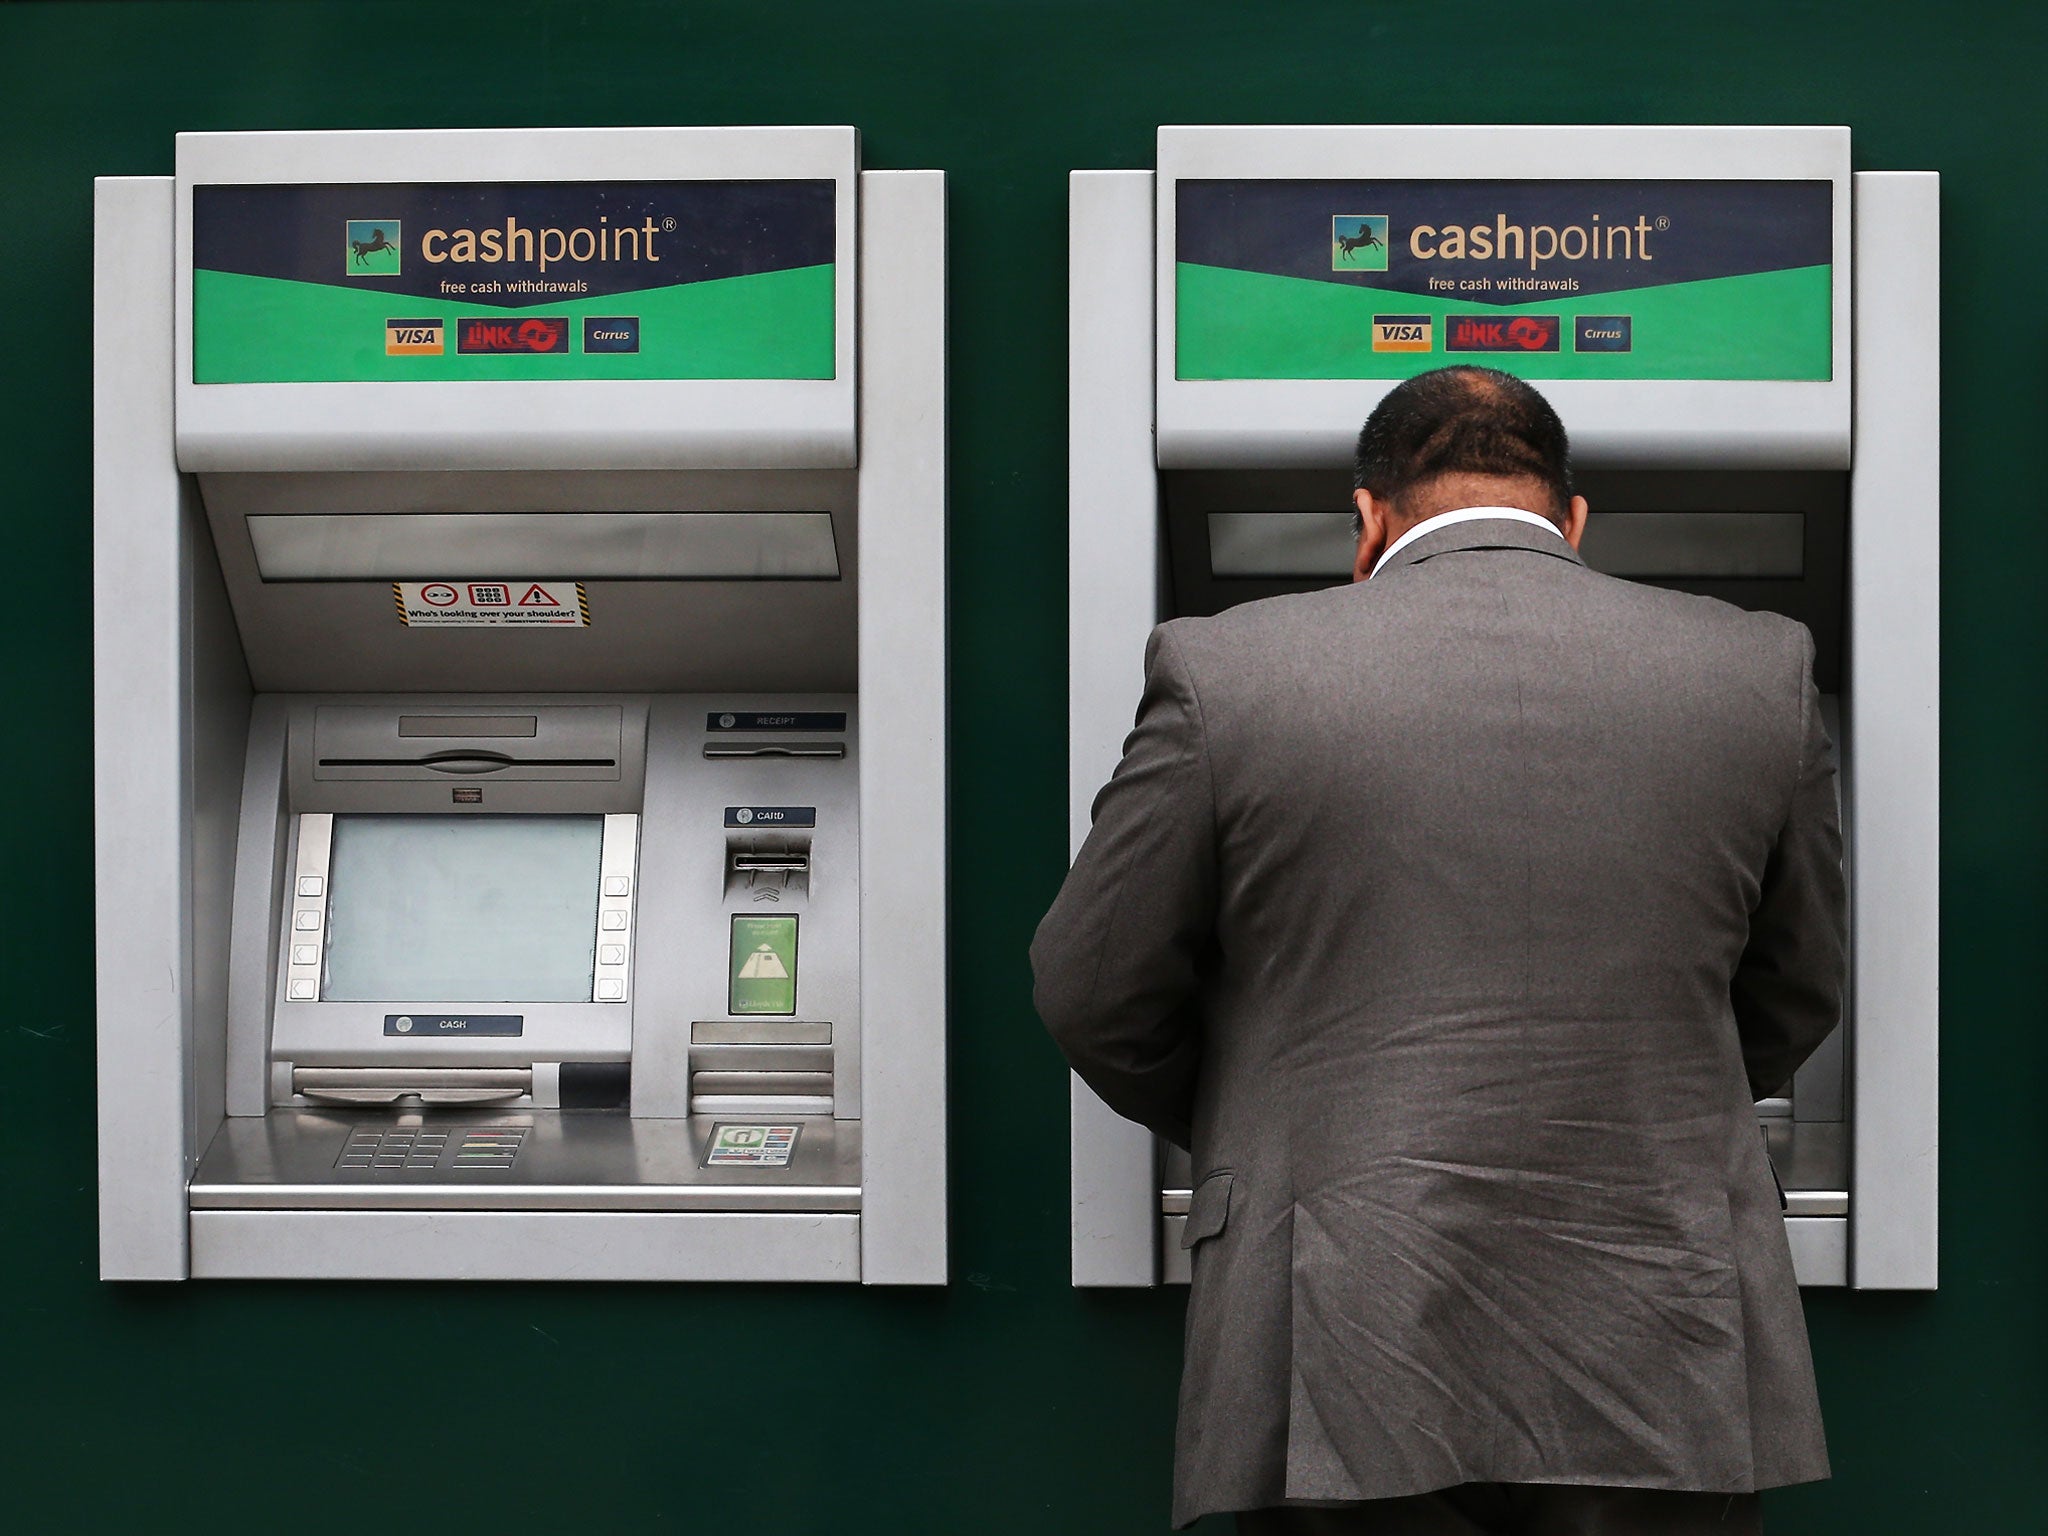 Some Lloyds Banking Group customers experienced issues using cash machines and bank cards on Sunday